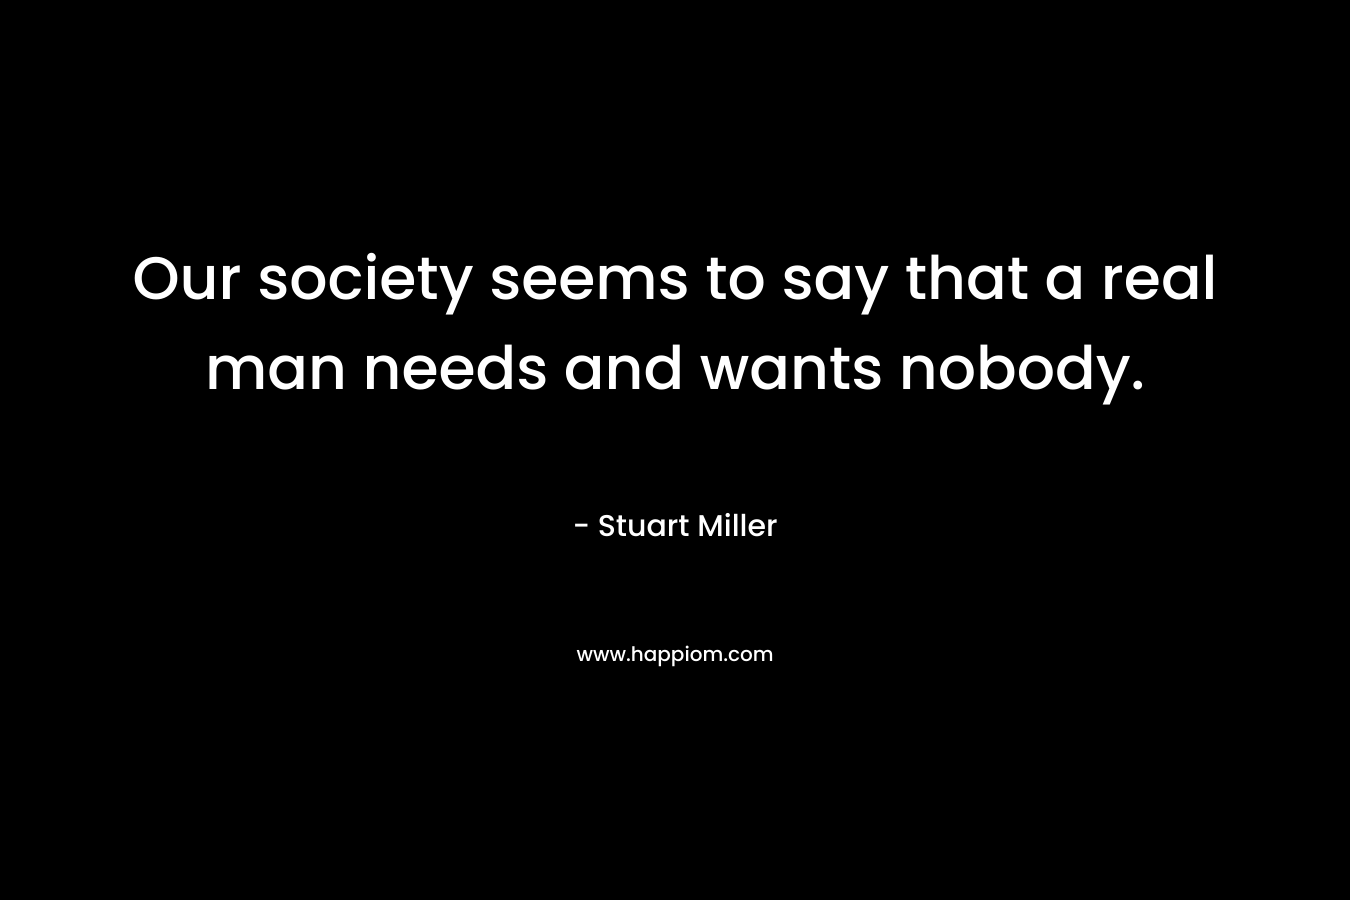 Our society seems to say that a real man needs and wants nobody. – Stuart Miller